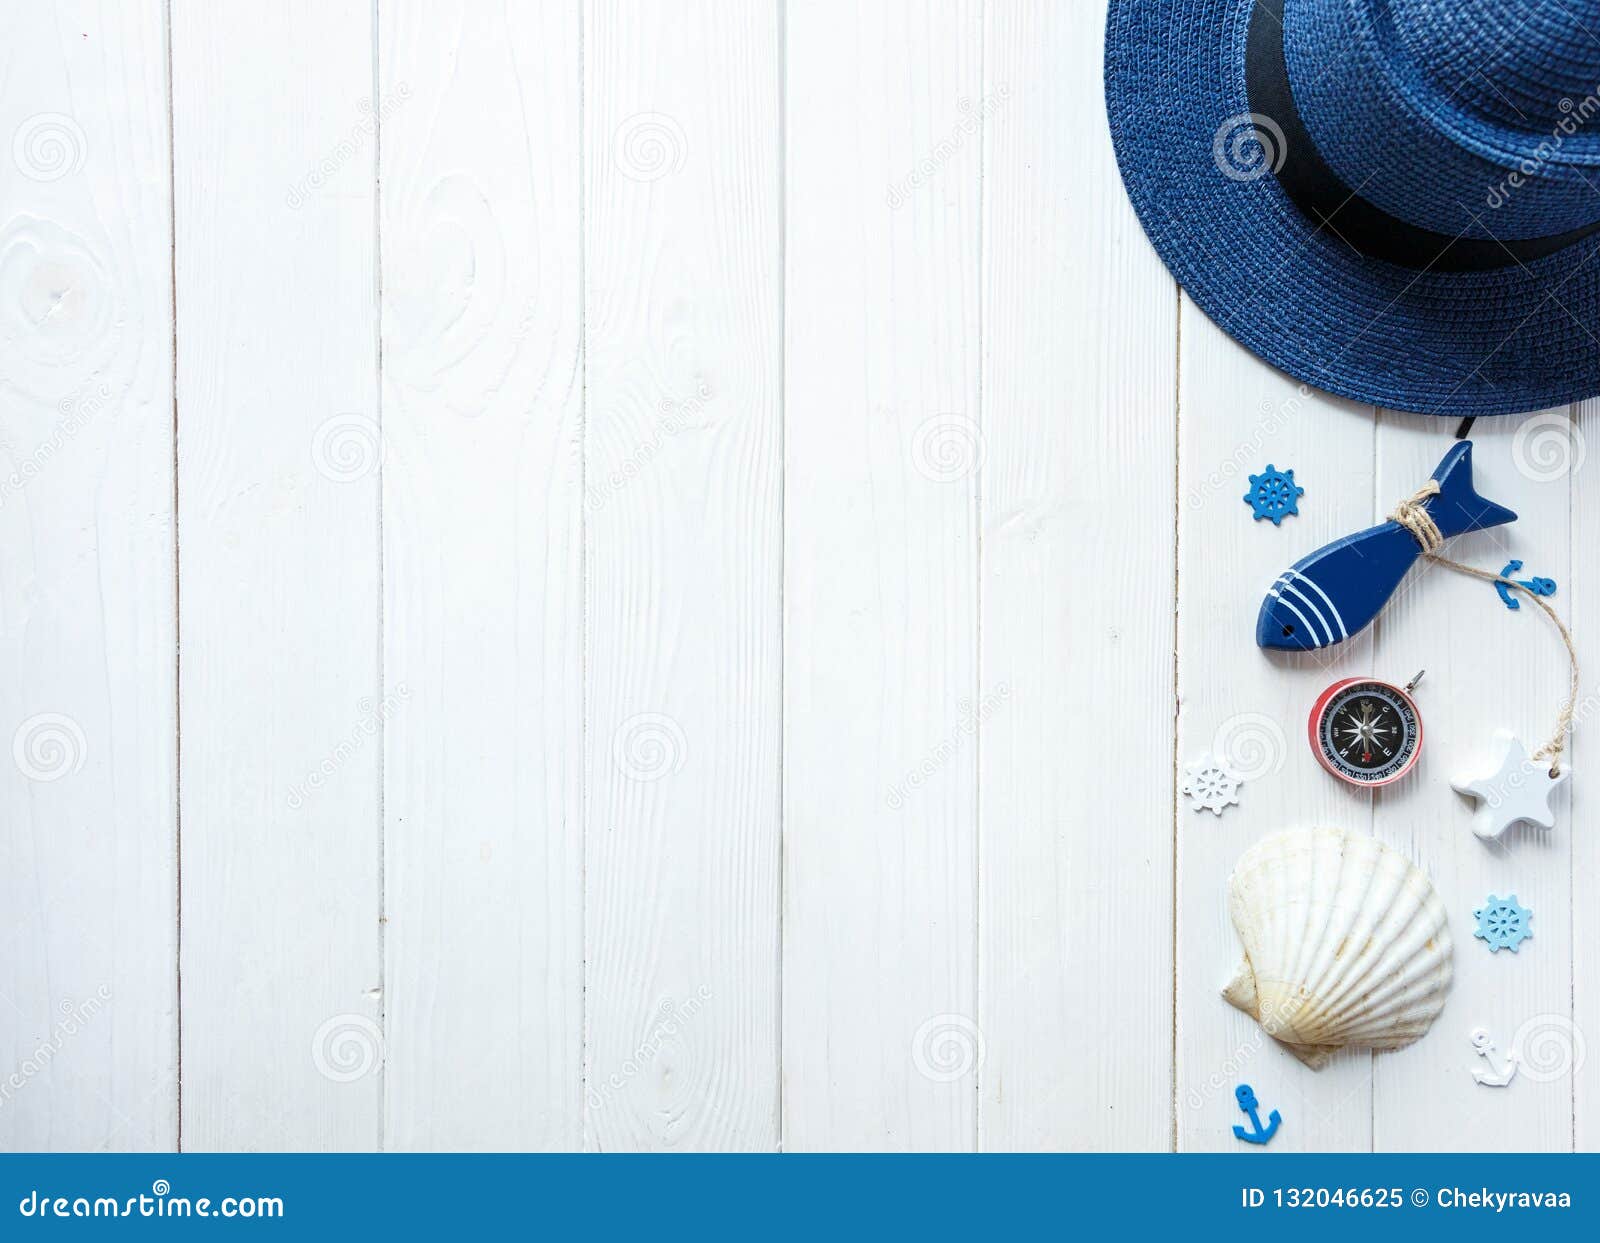 Marine Items on Wooden Background. Sea Objects: Straw Hat, Swimsuit ...